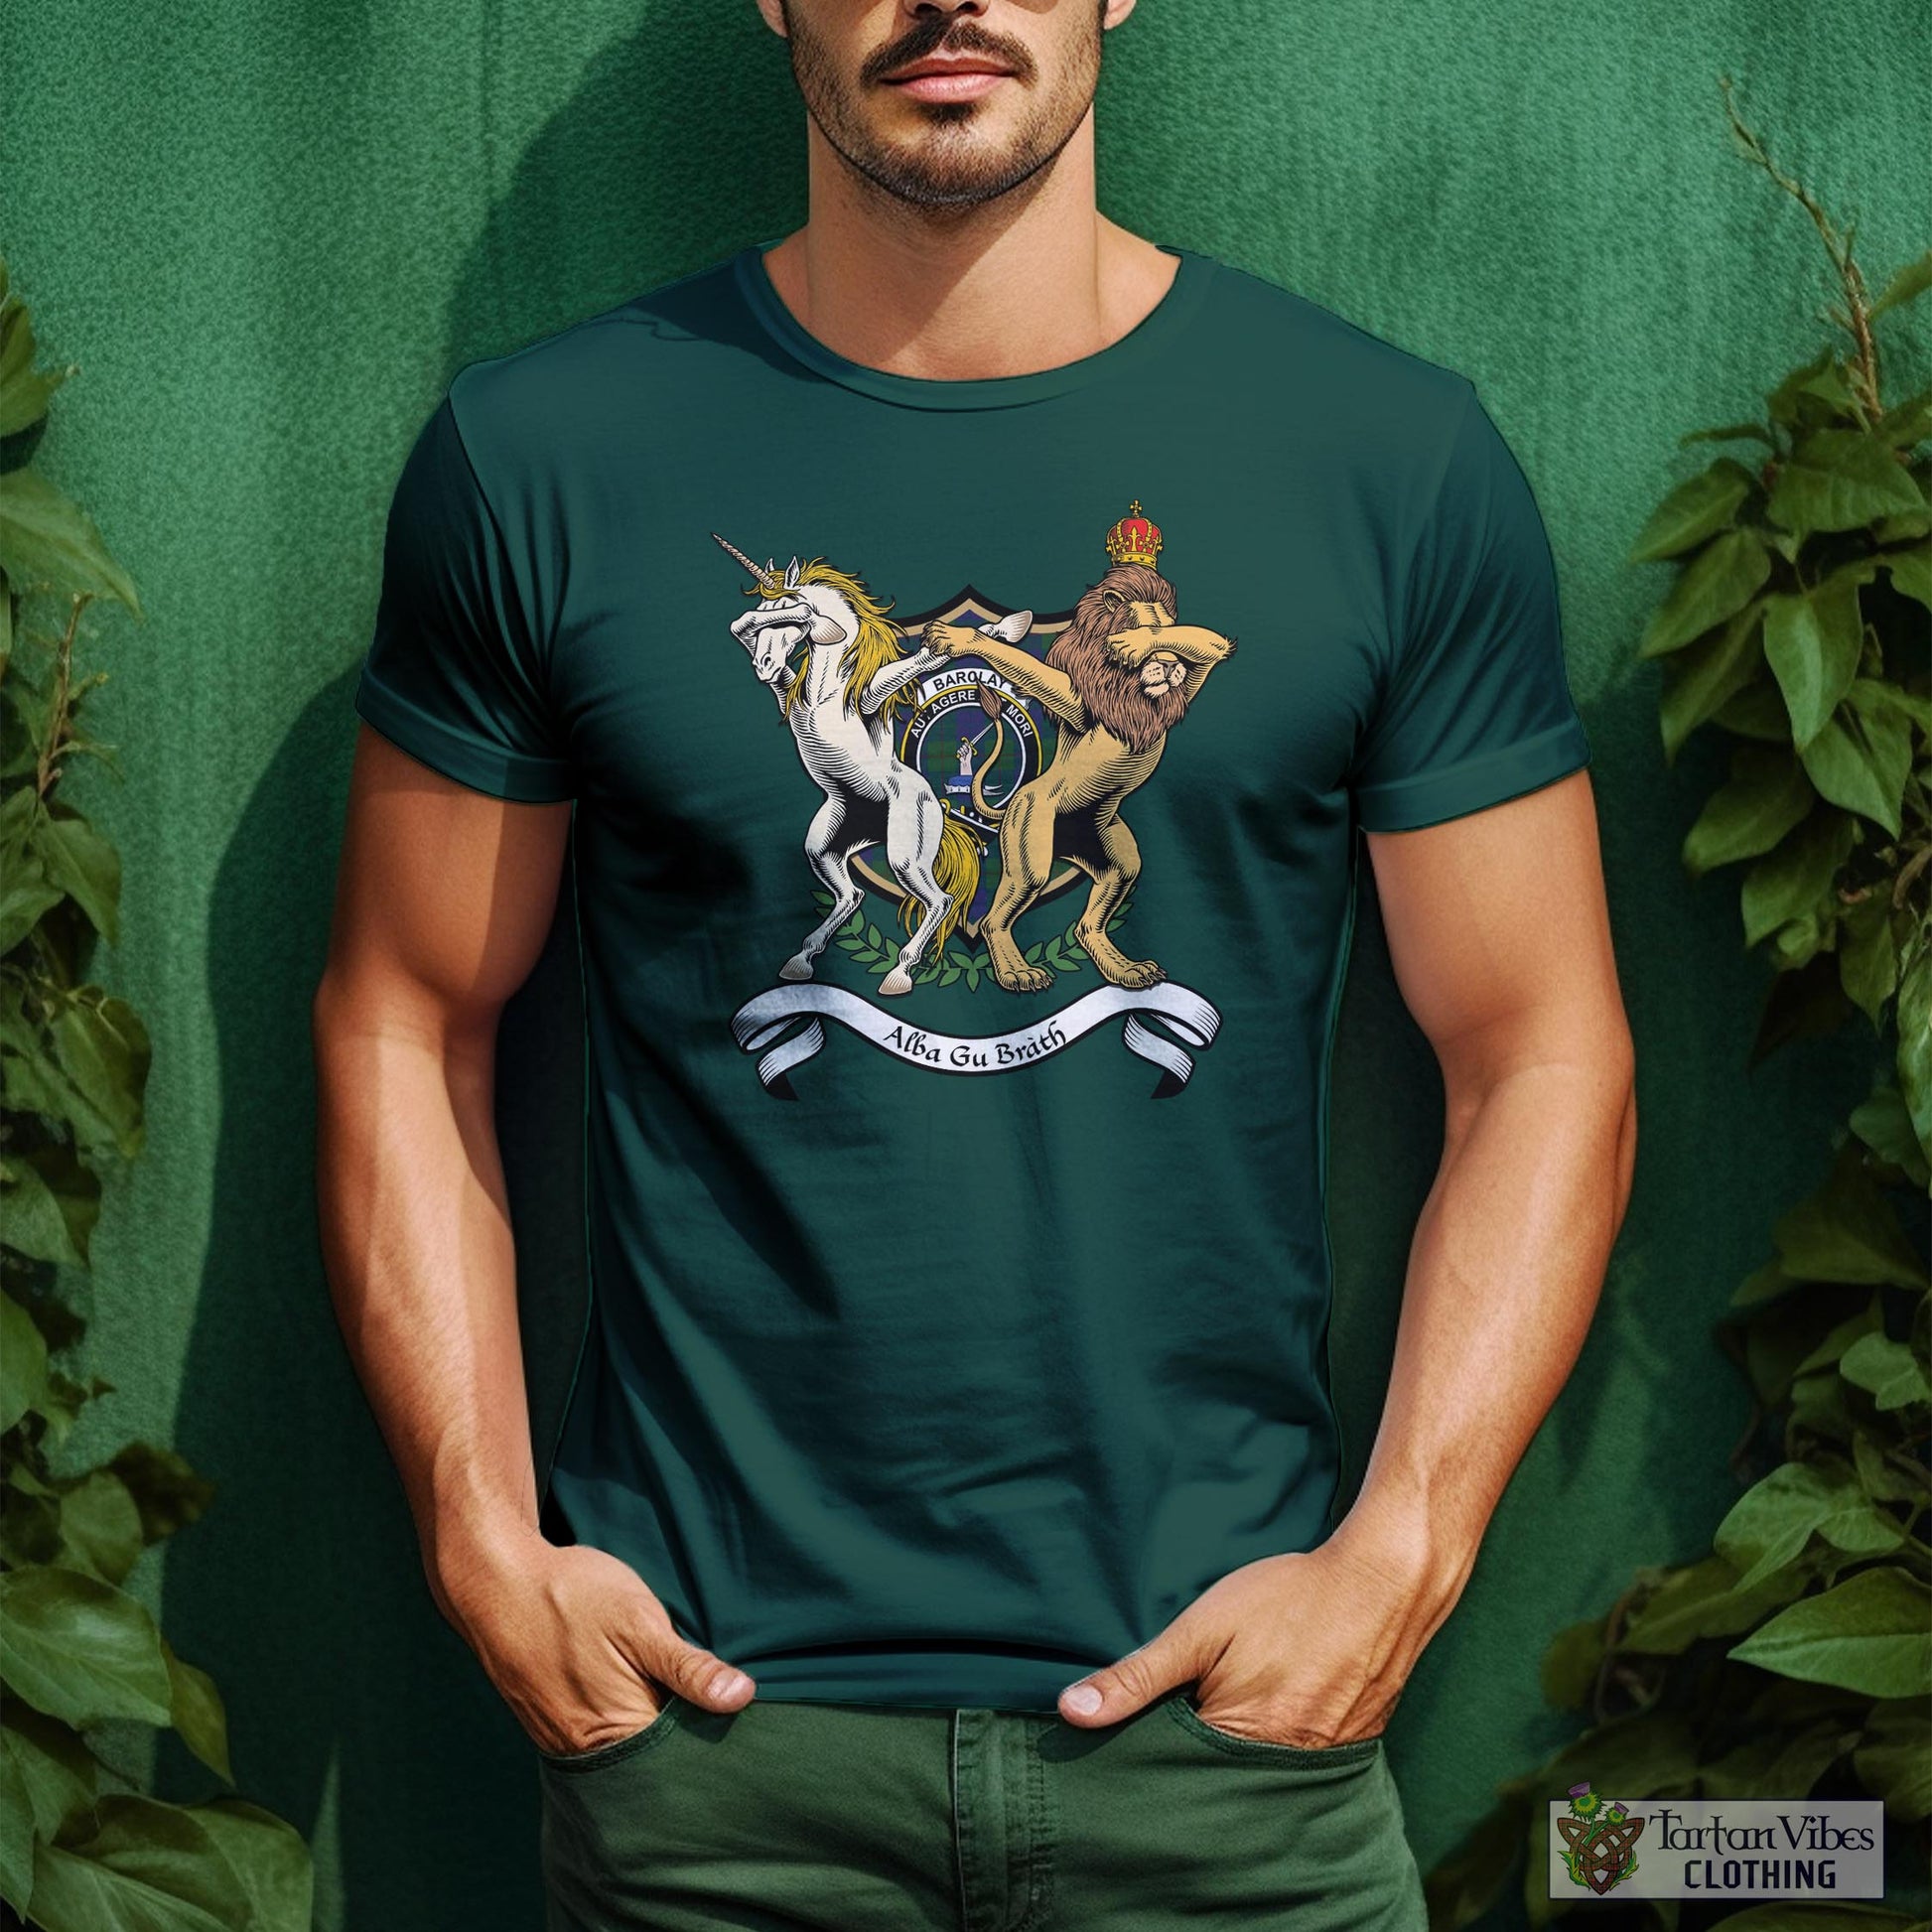 Tartan Vibes Clothing Barclay Family Crest Cotton Men's T-Shirt with Scotland Royal Coat Of Arm Funny Style